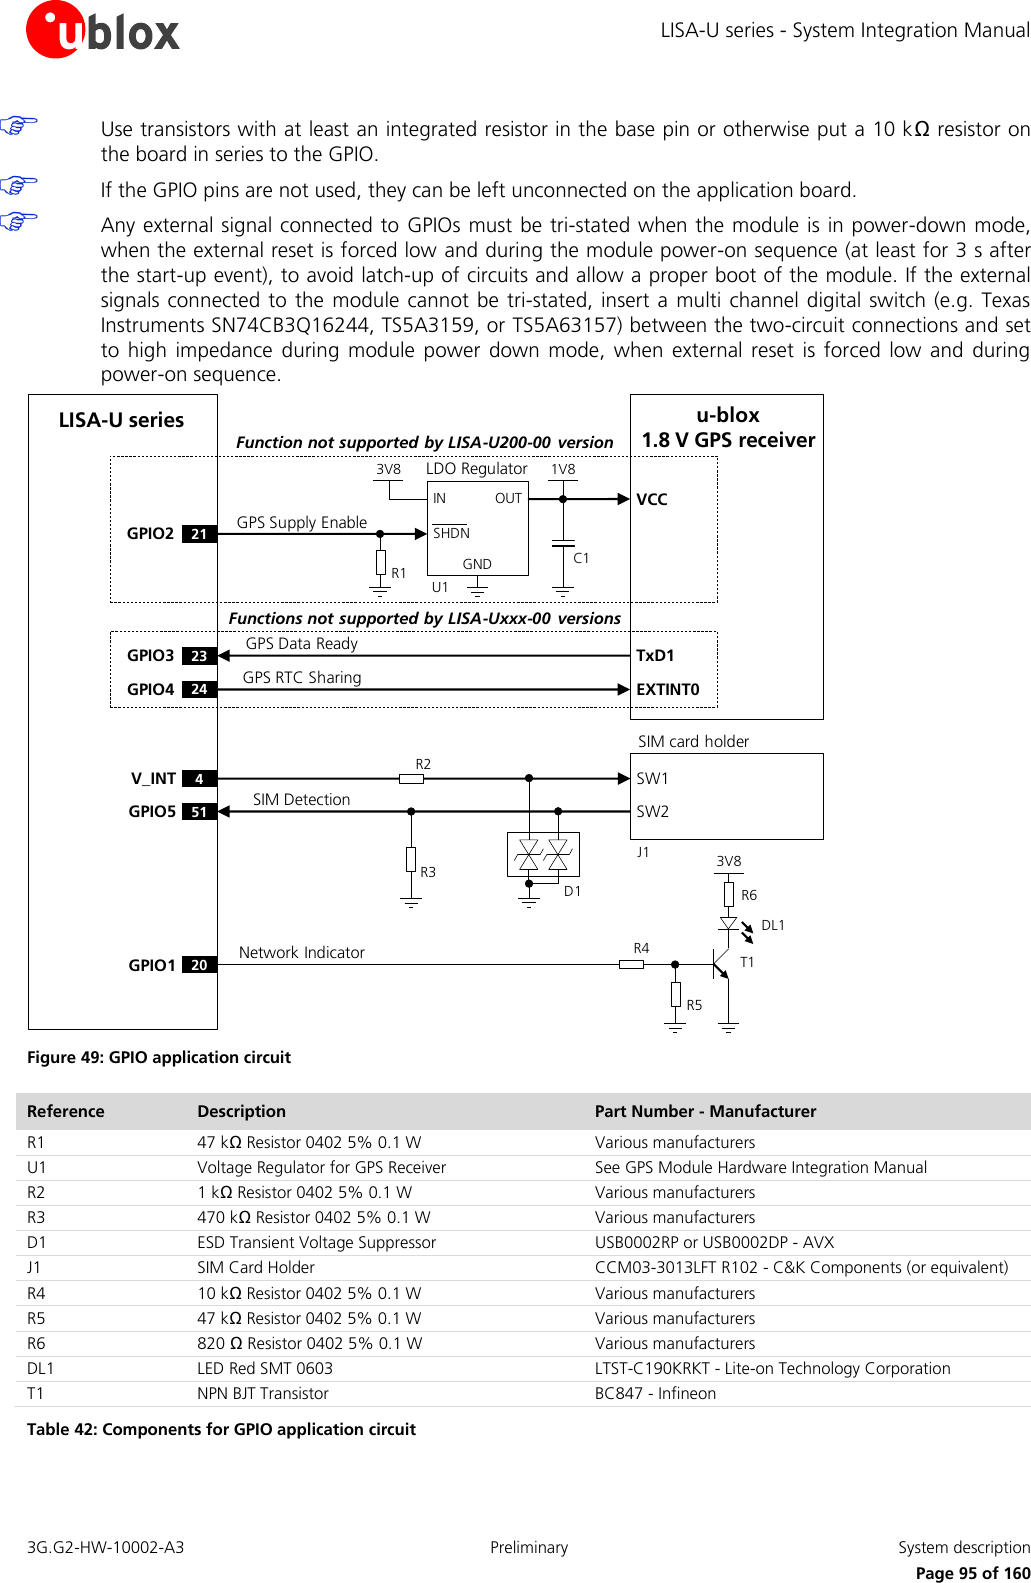 LISA-U series - System Integration Manual 3G.G2-HW-10002-A3  Preliminary  System description      Page 95 of 160  Use transistors with at least an integrated resistor in the base pin or otherwise put a 10 kΩ resistor on the board in series to the GPIO.  If the GPIO pins are not used, they can be left unconnected on the application board.  Any external signal connected to GPIOs must be tri-stated when the module is in power-down mode, when the external reset is forced low and during the module power-on sequence (at least for 3 s after the start-up event), to avoid latch-up of circuits and allow a proper boot of the module. If the external signals connected to the  module cannot be  tri-stated,  insert a  multi channel digital switch (e.g. Texas Instruments SN74CB3Q16244, TS5A3159, or TS5A63157) between the two-circuit connections and set to  high impedance  during  module  power  down  mode,  when external  reset  is forced  low  and  during power-on sequence. SIM card holderSW1 SW2 4V_INT51GPIO5R3R2OUTINGNDLDO RegulatorSHDN3V8 1V8GPIO3GPIO4TxD1EXTINT02324R1VCCGPIO2 21LISA-U series u-blox1.8 V GPS receiverU1J1C1R4R63V8Network IndicatorR5GPS Supply EnableGPS Data ReadyGPS RTC SharingSIM Detection20GPIO1DL1T1D1Functions not supported by LISA-Uxxx-00  versionsFunction not supported by LISA-U200-00  version Figure 49: GPIO application circuit Reference Description Part Number - Manufacturer R1 47 kΩ Resistor 0402 5% 0.1 W Various manufacturers U1 Voltage Regulator for GPS Receiver See GPS Module Hardware Integration Manual R2 1 kΩ Resistor 0402 5% 0.1 W Various manufacturers R3 470 kΩ Resistor 0402 5% 0.1 W Various manufacturers D1 ESD Transient Voltage Suppressor USB0002RP or USB0002DP - AVX J1 SIM Card Holder CCM03-3013LFT R102 - C&amp;K Components (or equivalent) R4 10 kΩ Resistor 0402 5% 0.1 W Various manufacturers R5 47 kΩ Resistor 0402 5% 0.1 W Various manufacturers R6 820 Ω Resistor 0402 5% 0.1 W Various manufacturers DL1 LED Red SMT 0603 LTST-C190KRKT - Lite-on Technology Corporation T1 NPN BJT Transistor  BC847 - Infineon Table 42: Components for GPIO application circuit  